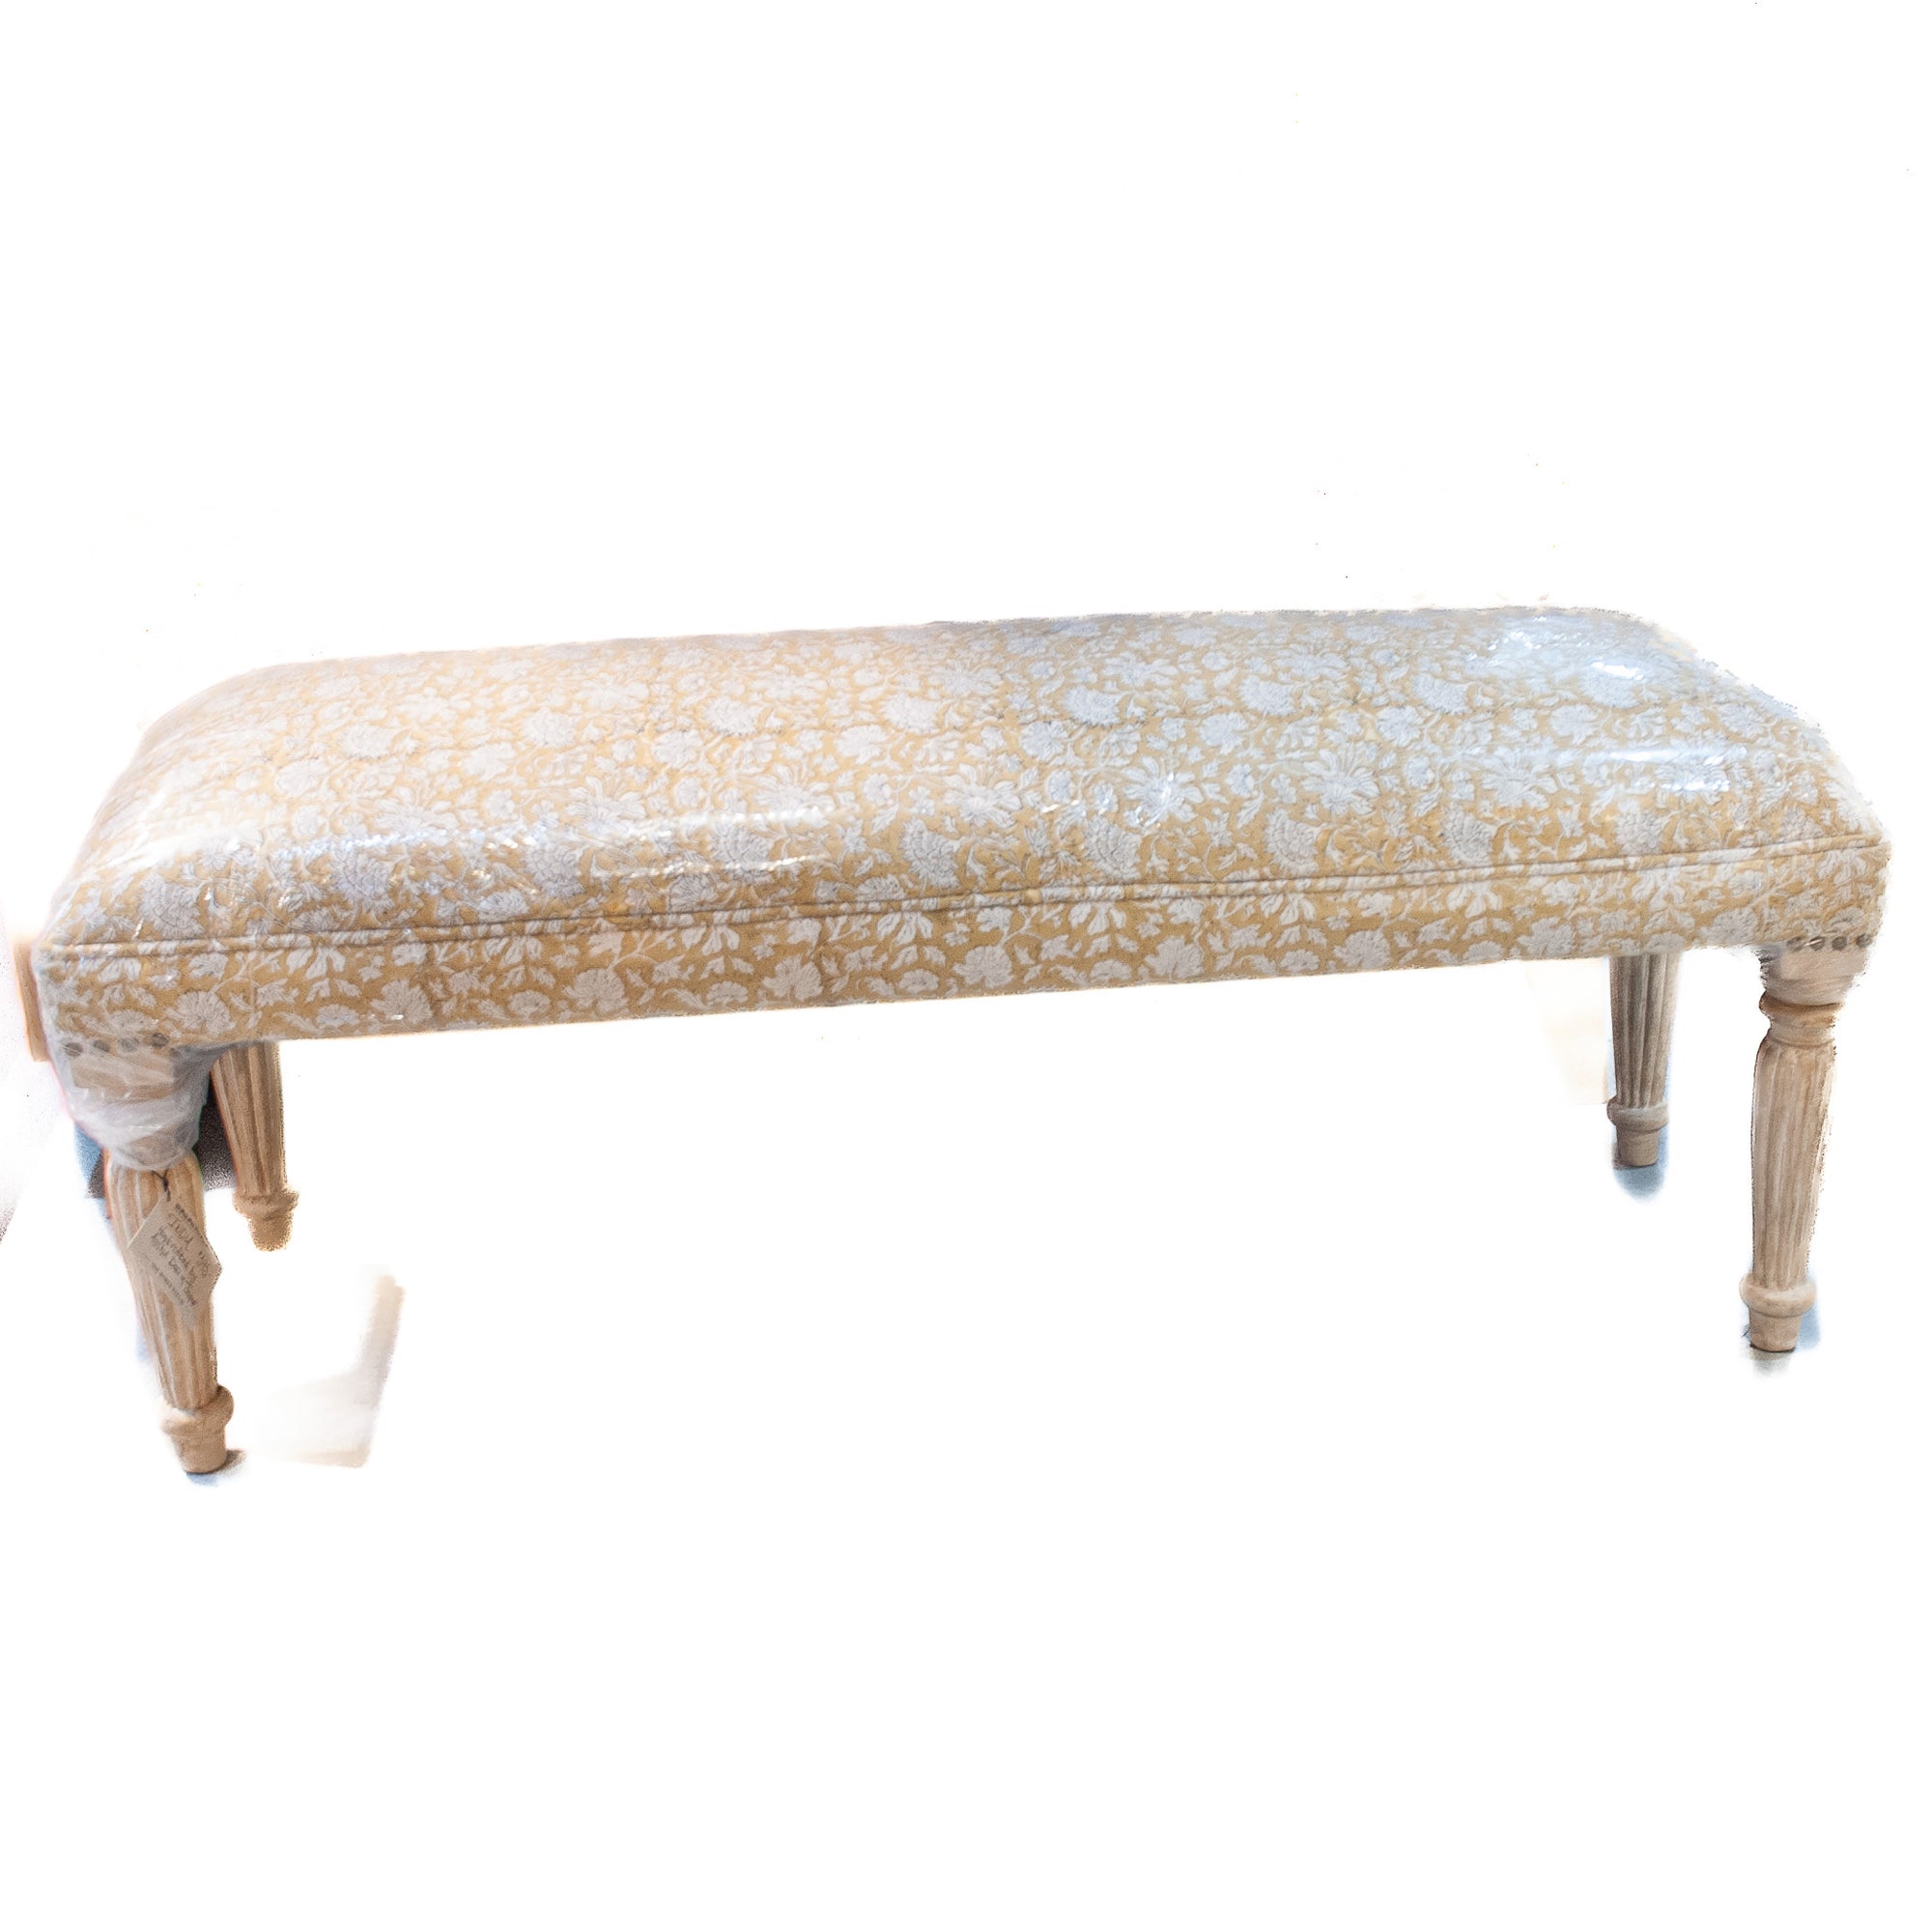 Indian Tufted Bench